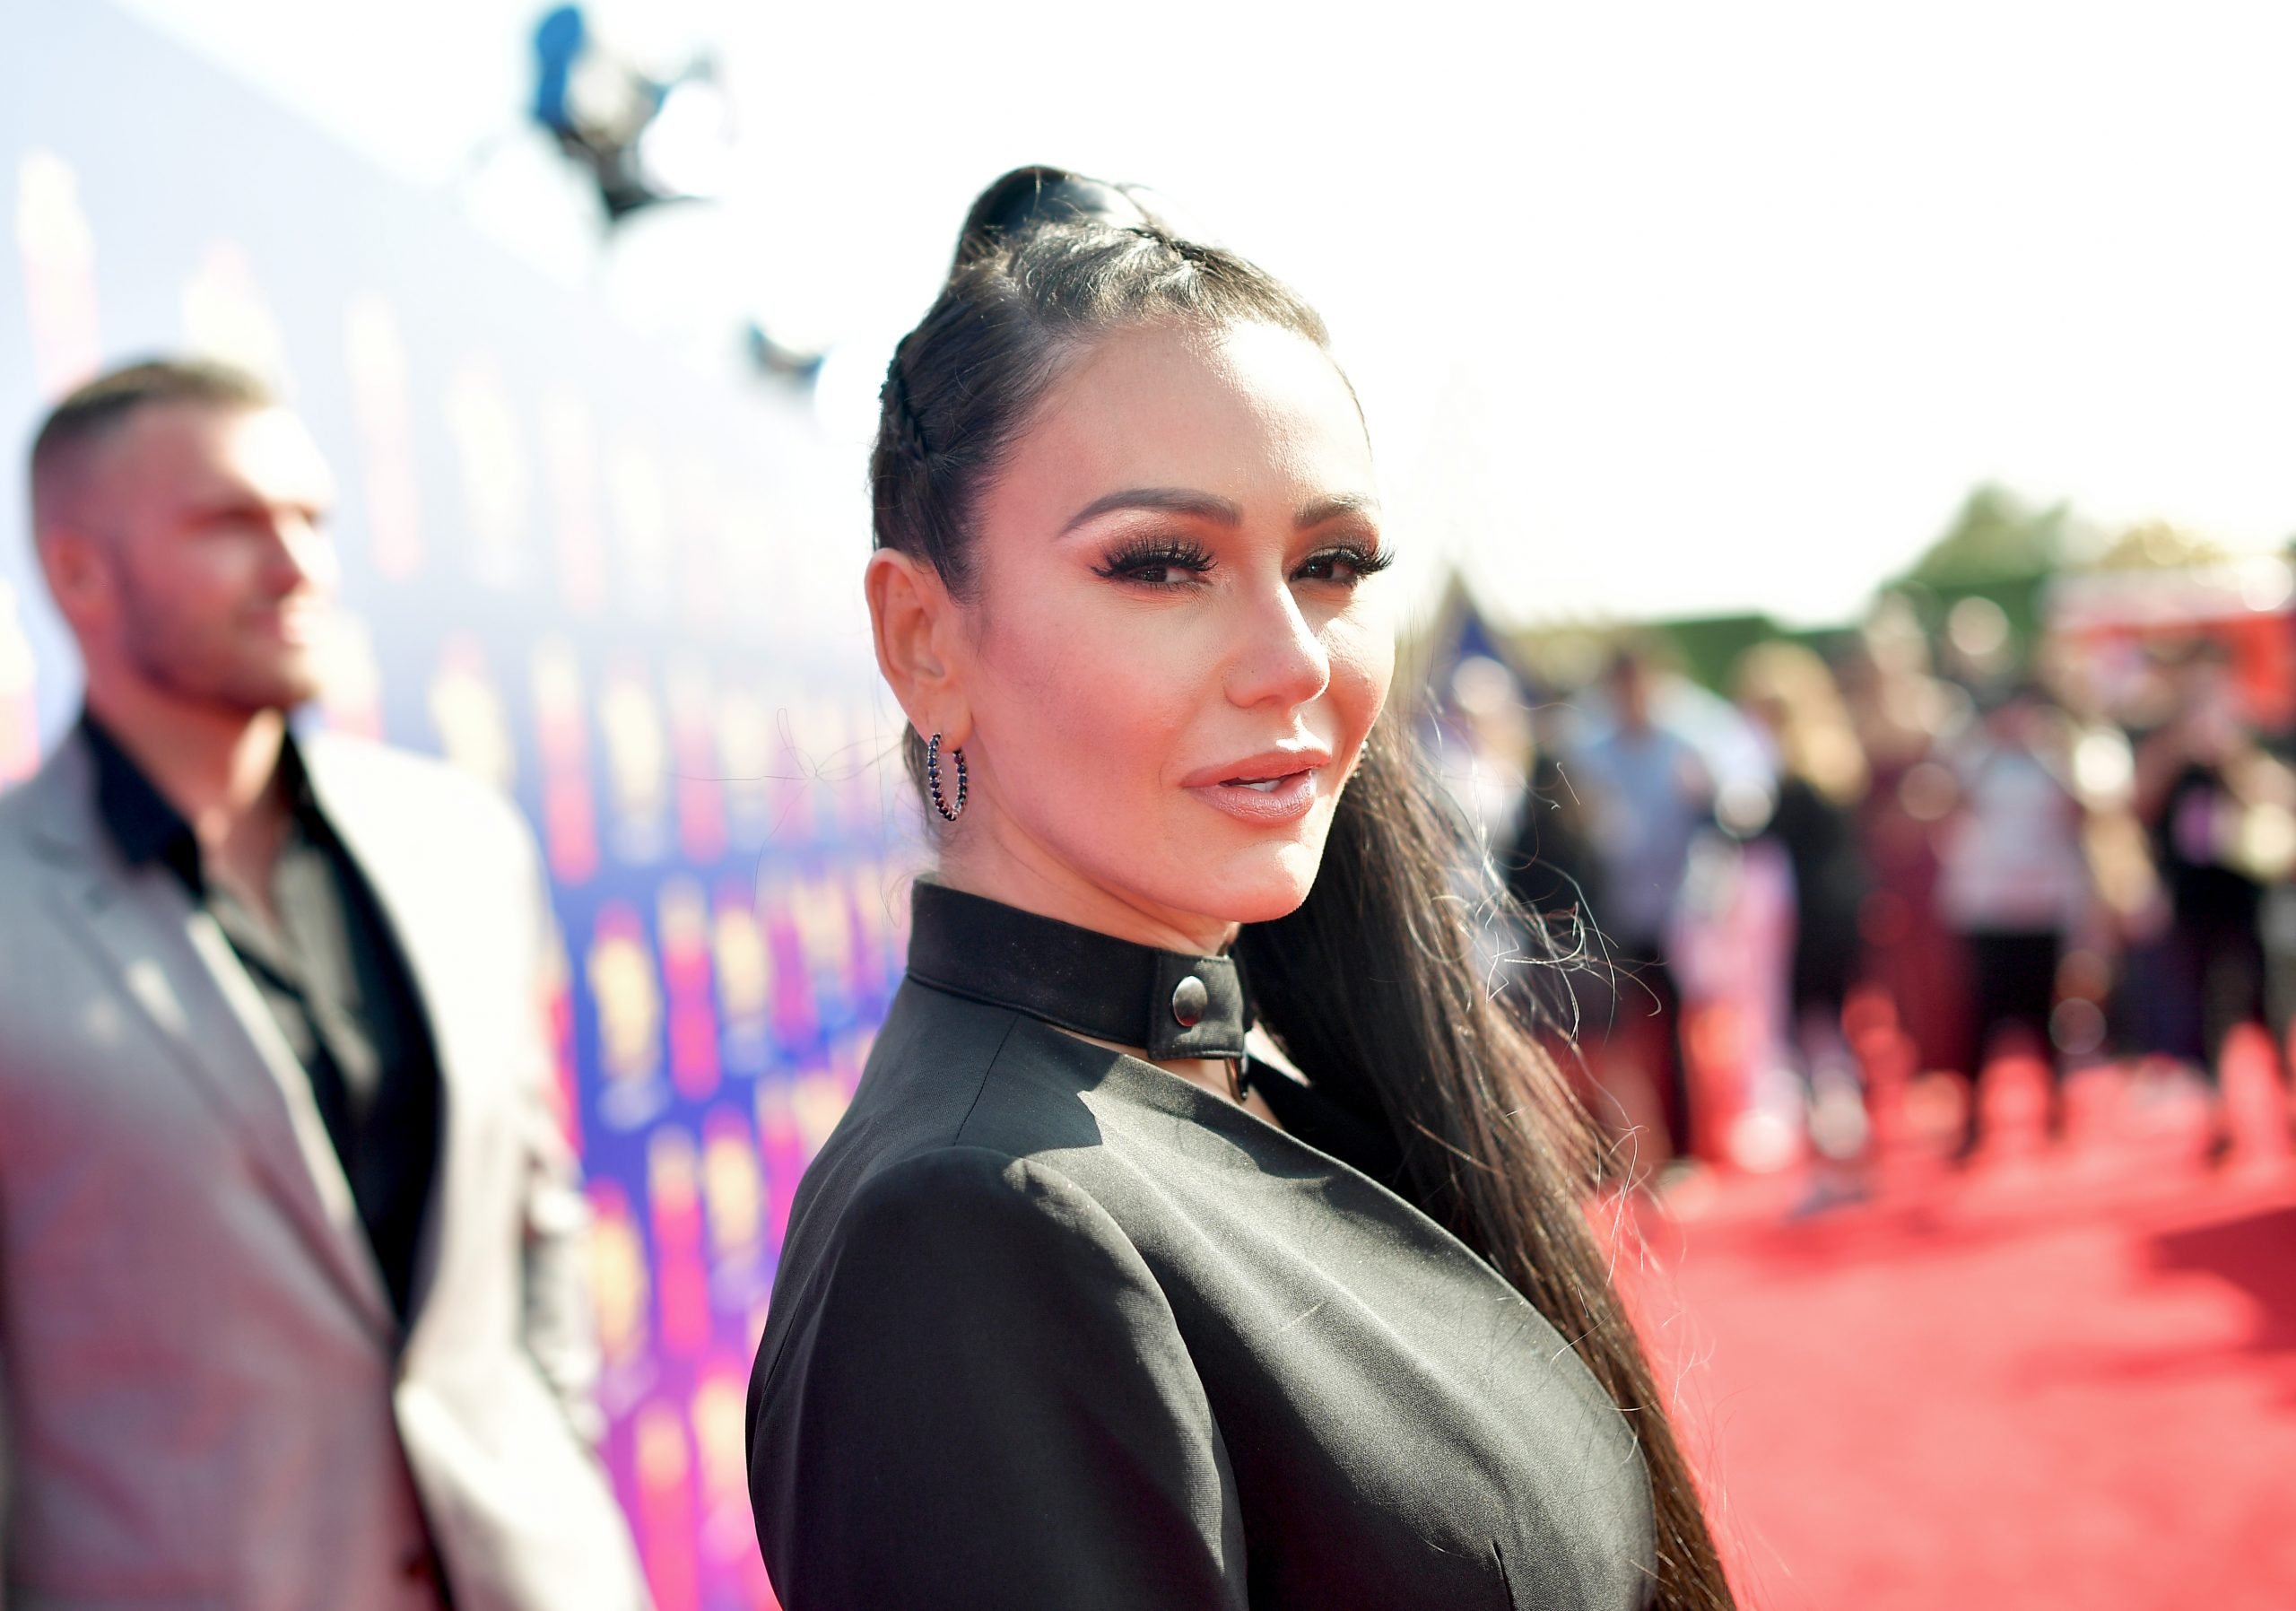 Jenni ‘JWoww’ Farley Celebrates ‘Jersey Shore’ Cameo in ‘Euphoria,’ Petitions for a Guest Spot